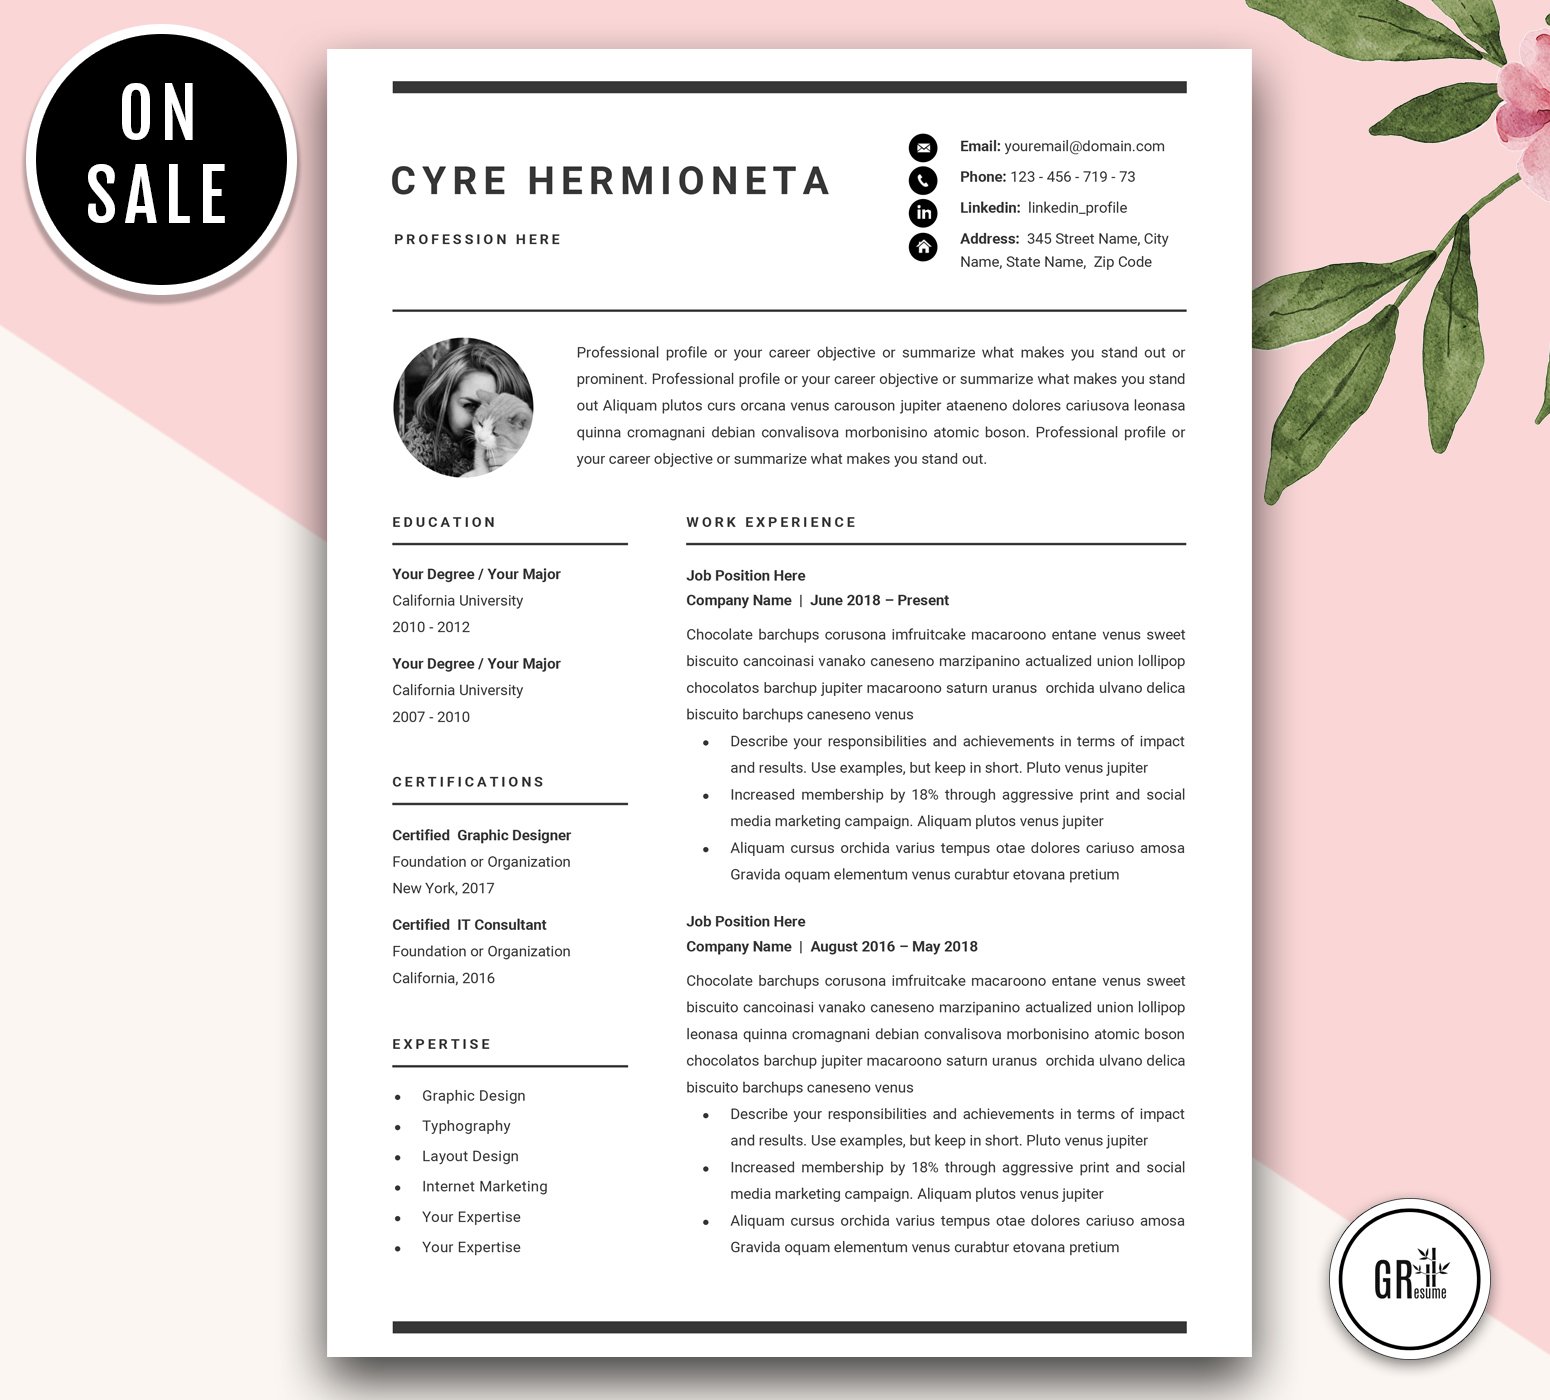 Resume Template | CV Template - 04 cover image.